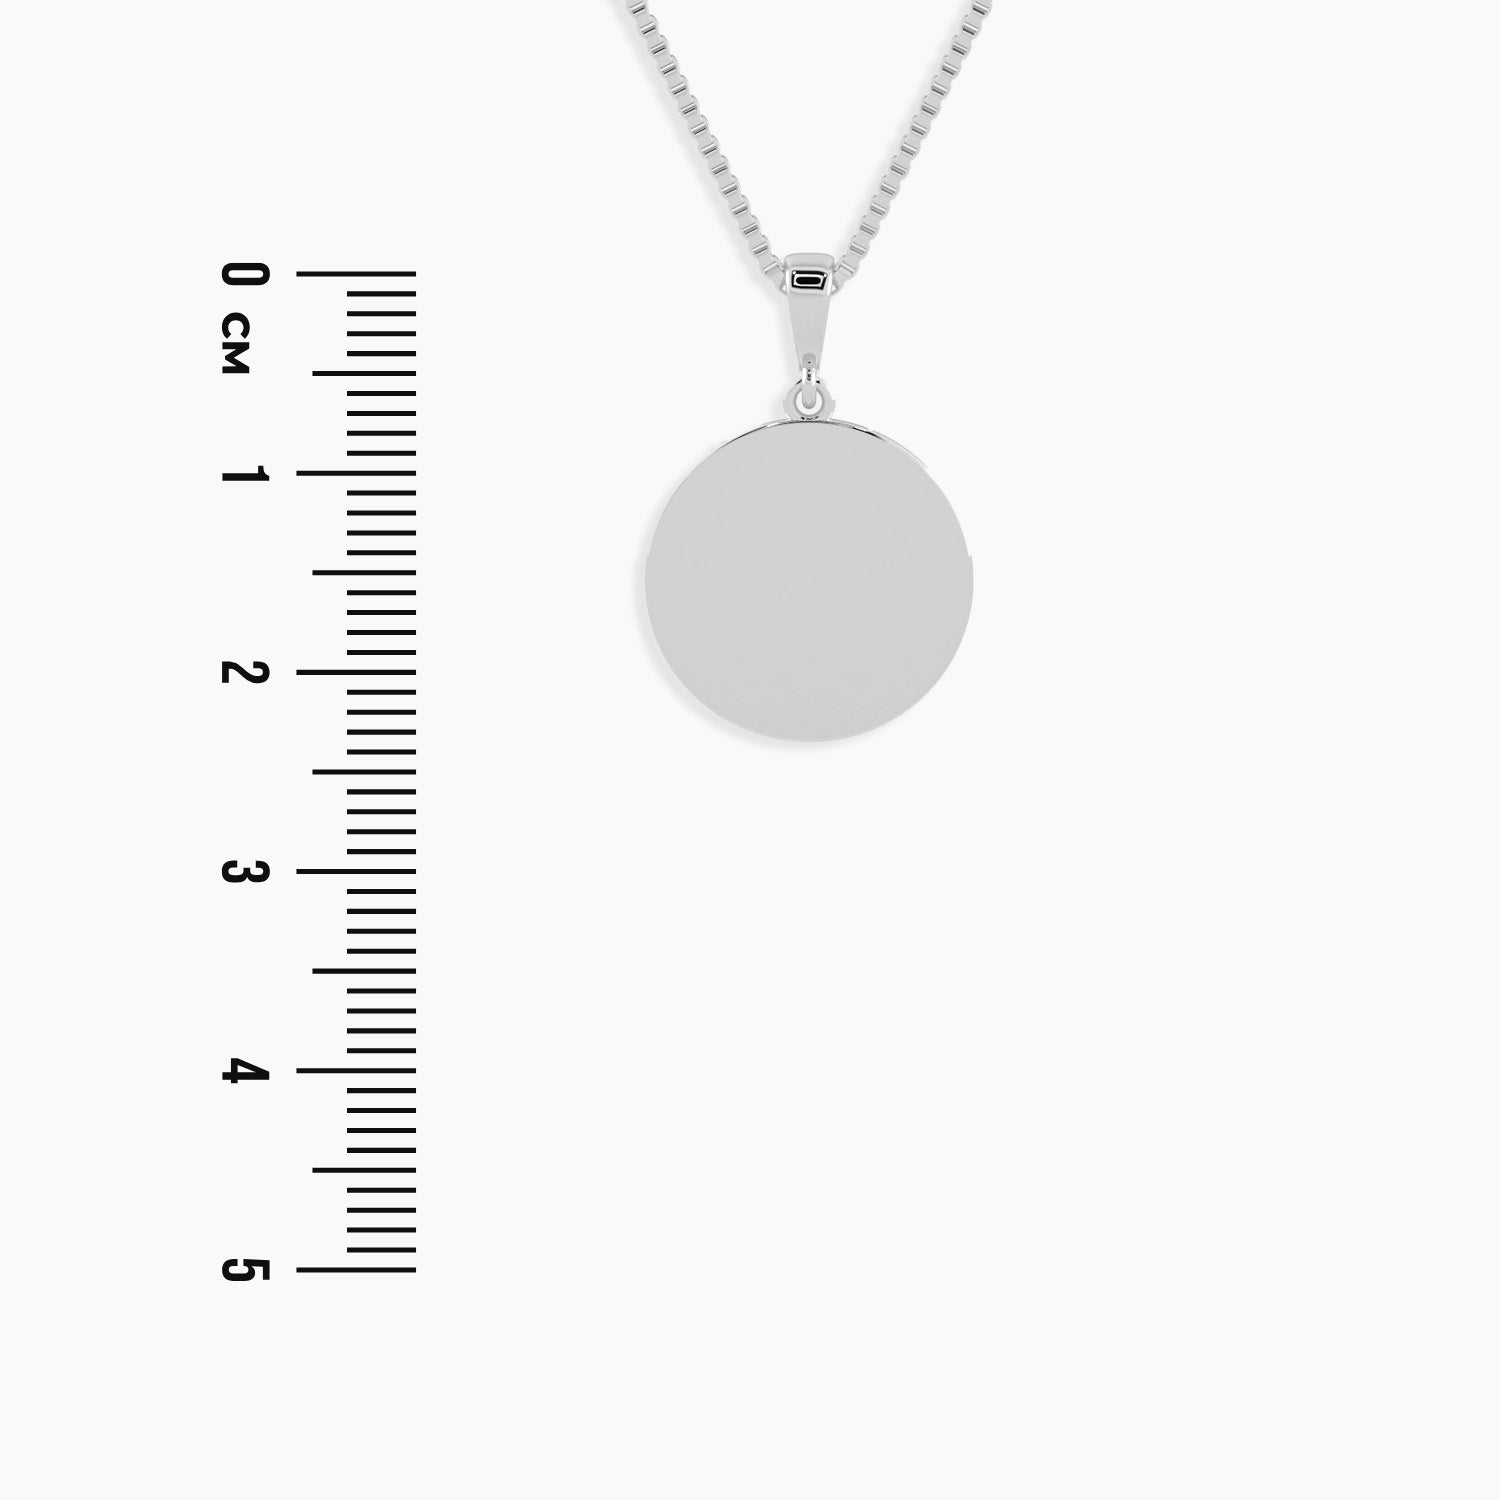 Classic Round Pendant: Amore Token displayed next to a scale, offering a clear representation of its compact size and dimensions, ideal for personalization and gifting.